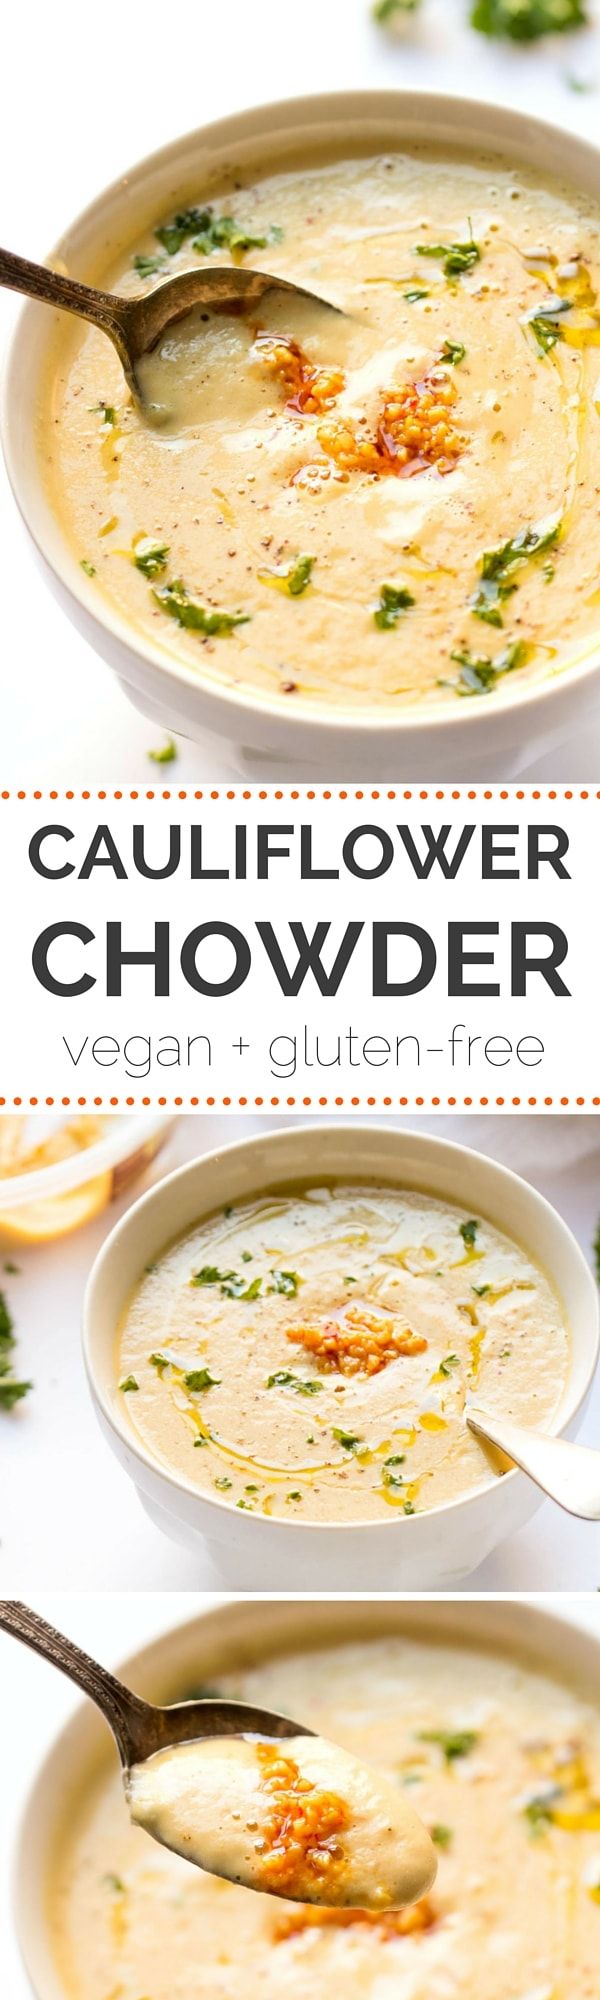 Delicious and super easy to make, this 30 MINUTE cauliflower chowder is made with roasted garlic, cashews and potatoes. Check out!